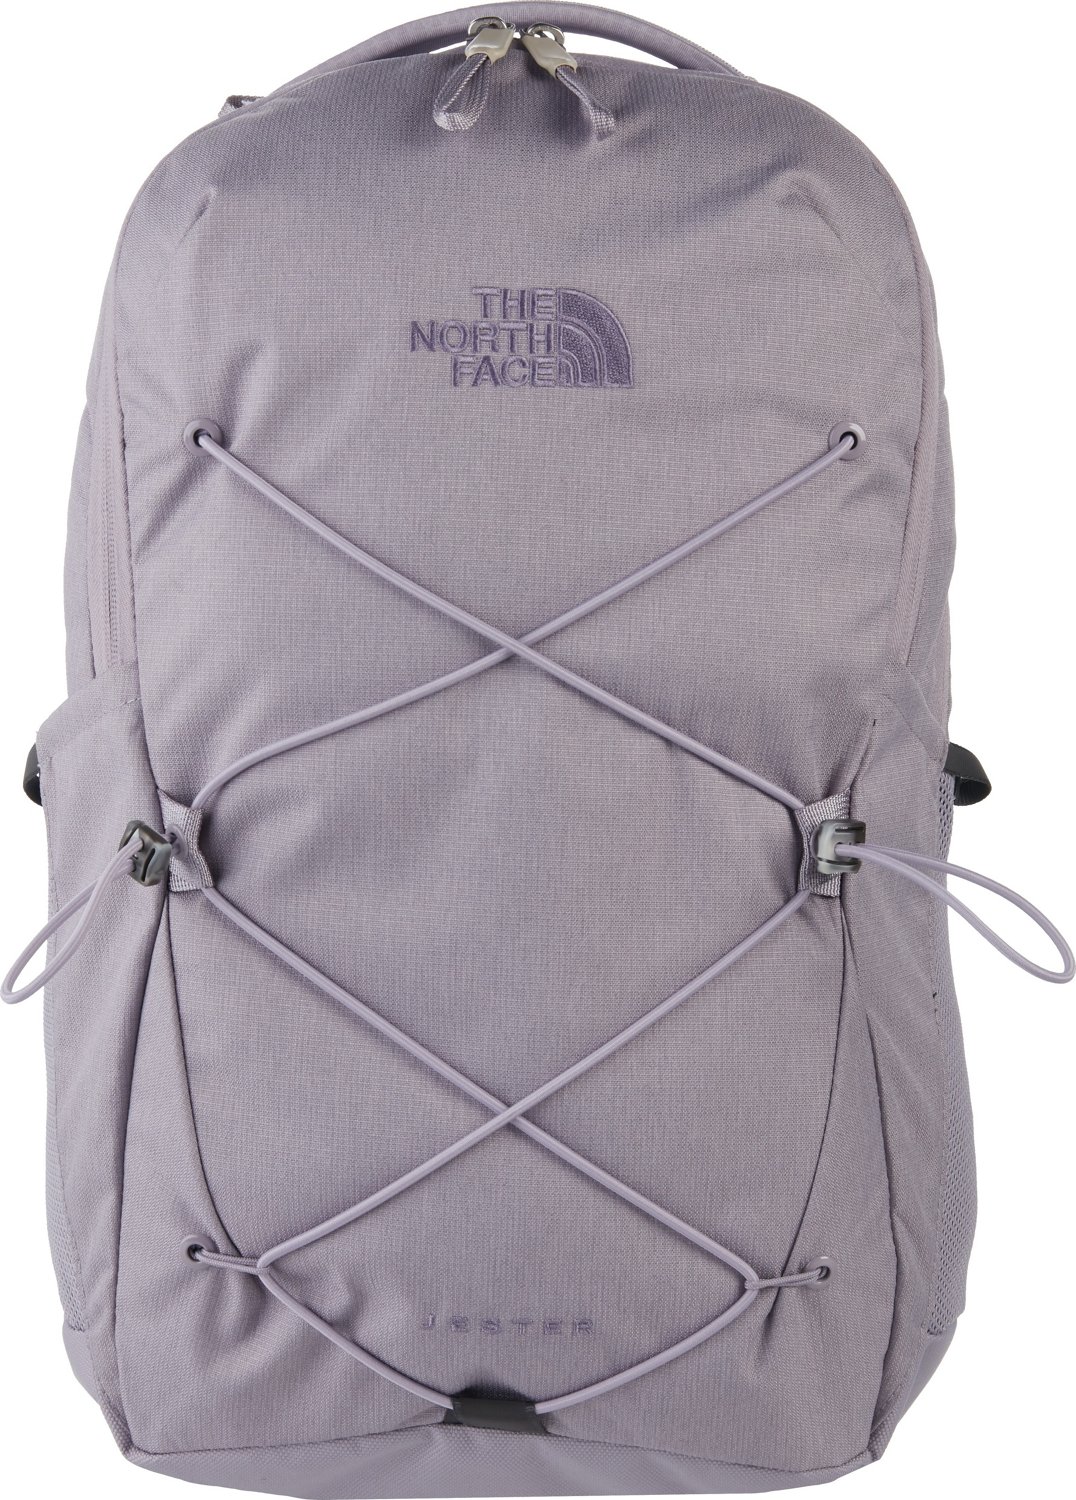 Voorgevoel Komst Biscuit The North Face Women's Jester Backpack | Academy